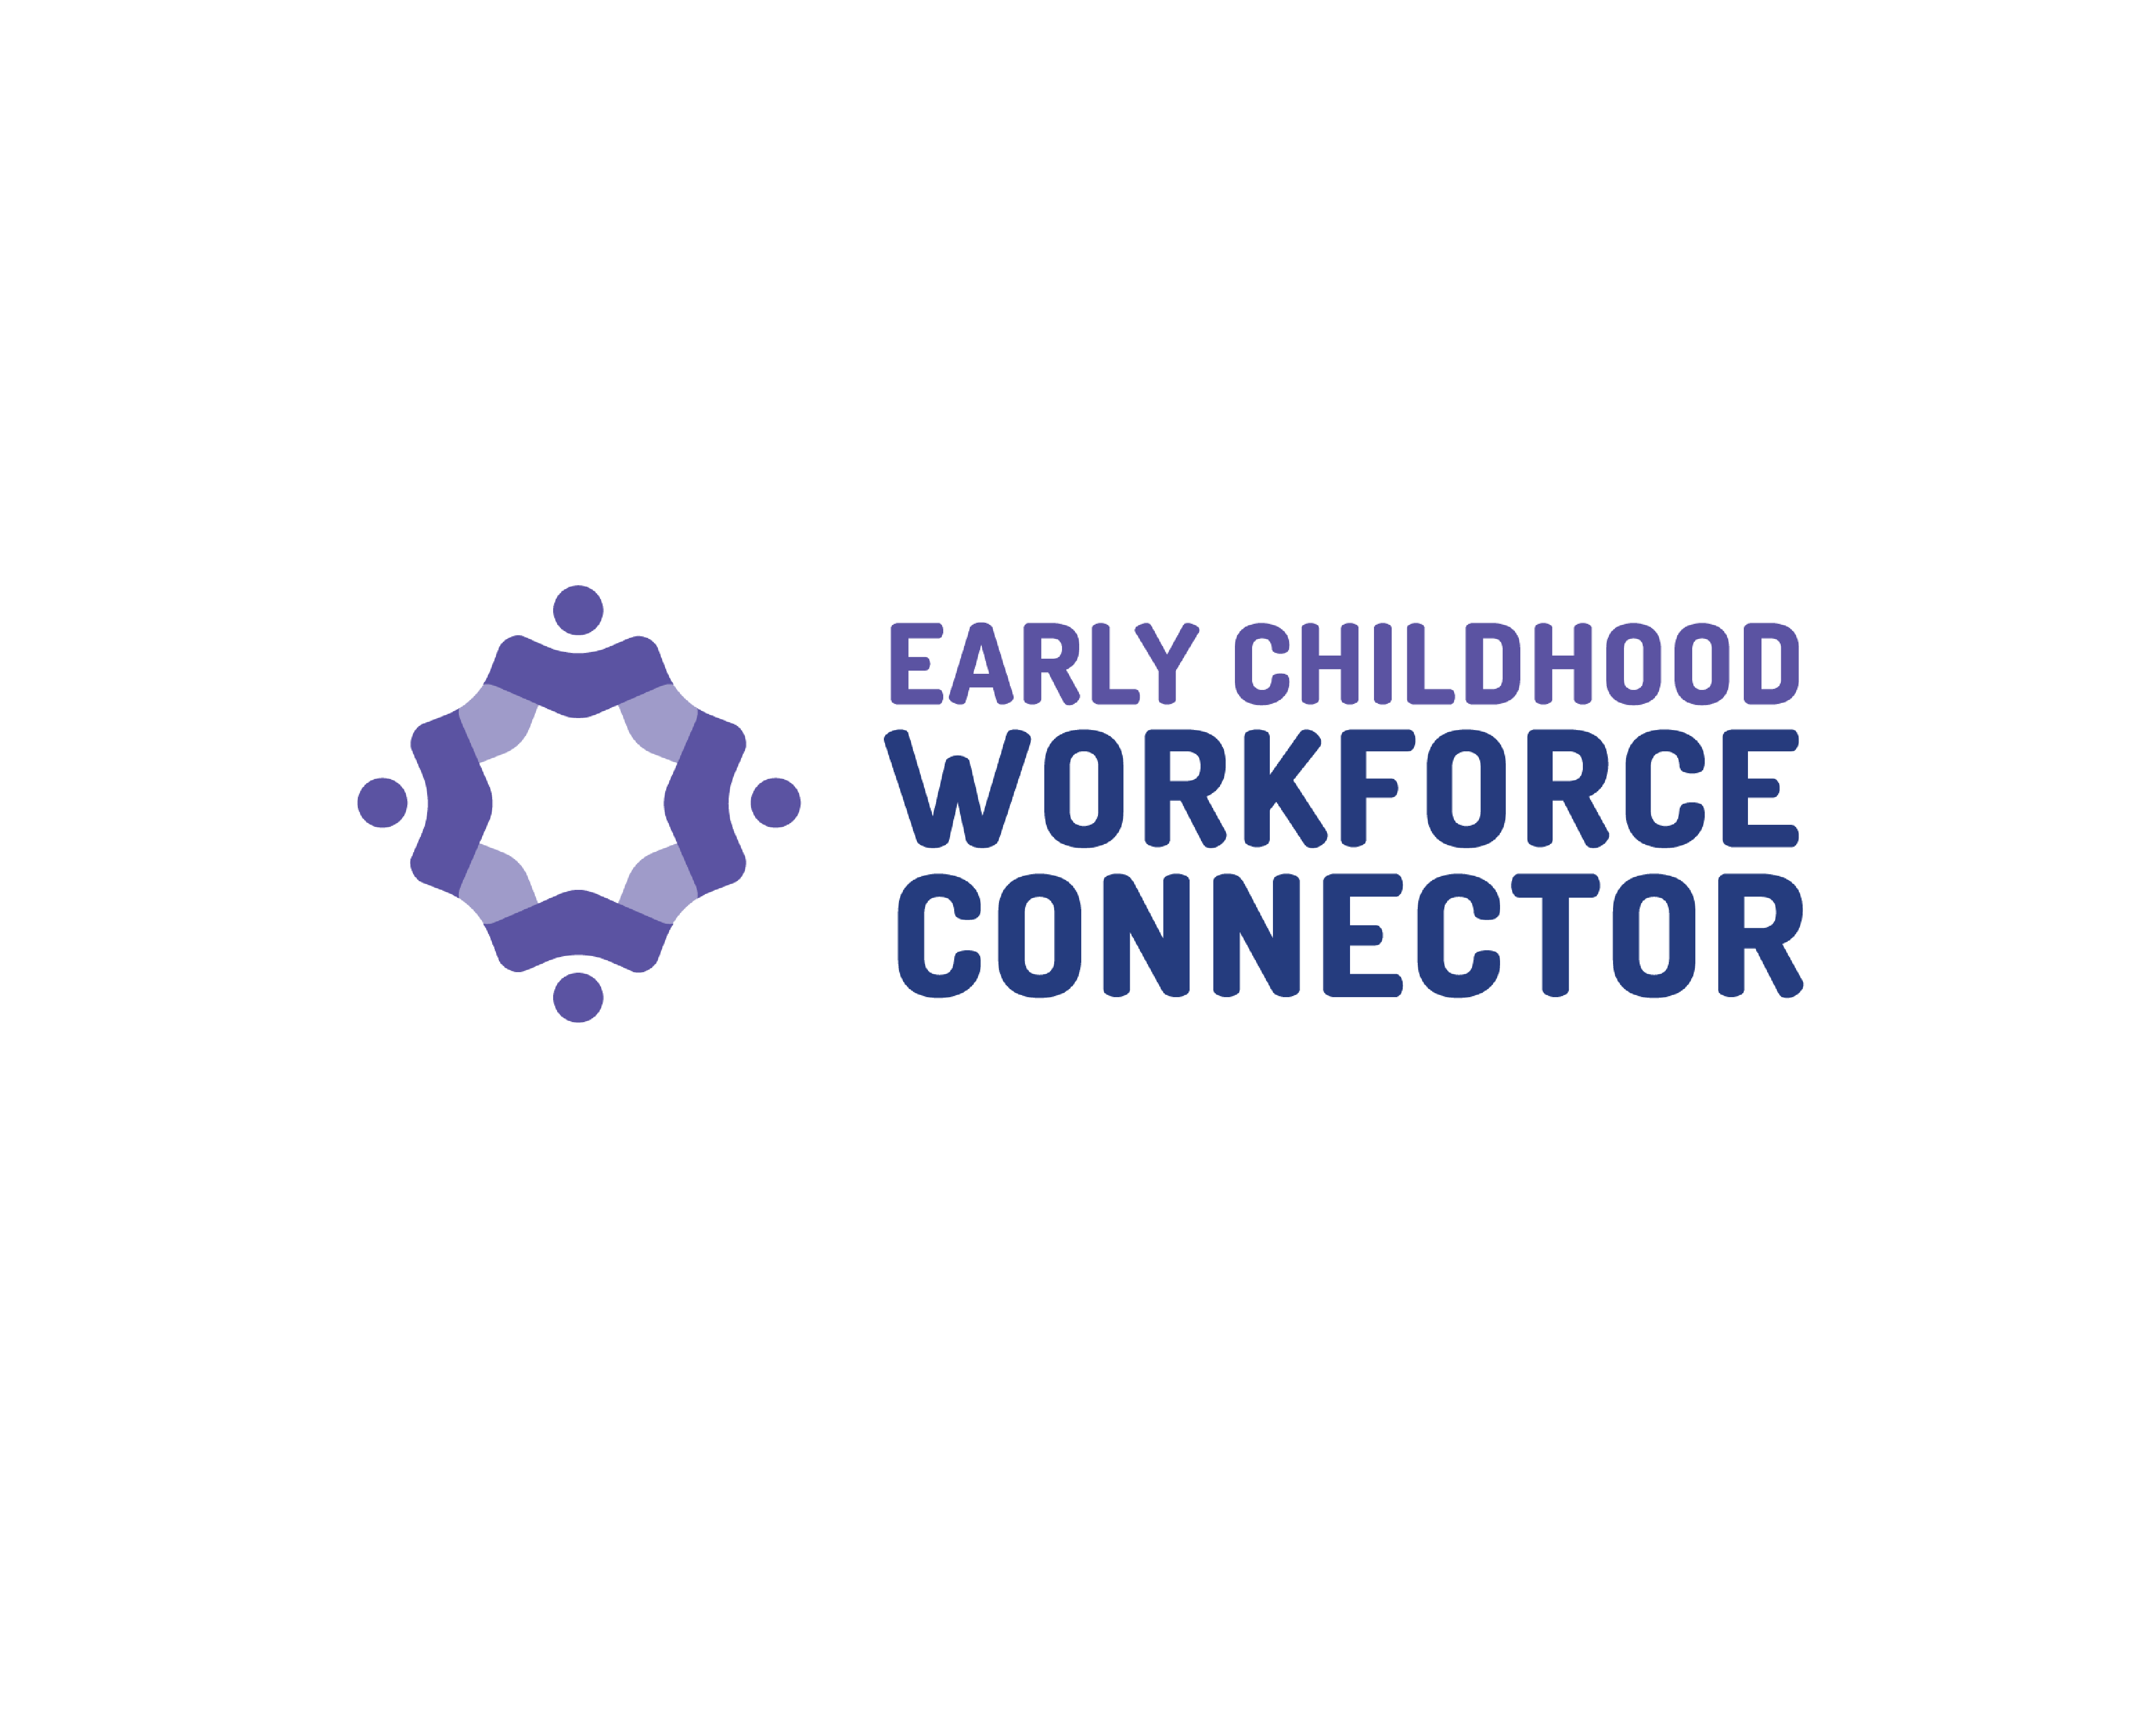 Early Childhood Workforce Connector logo.